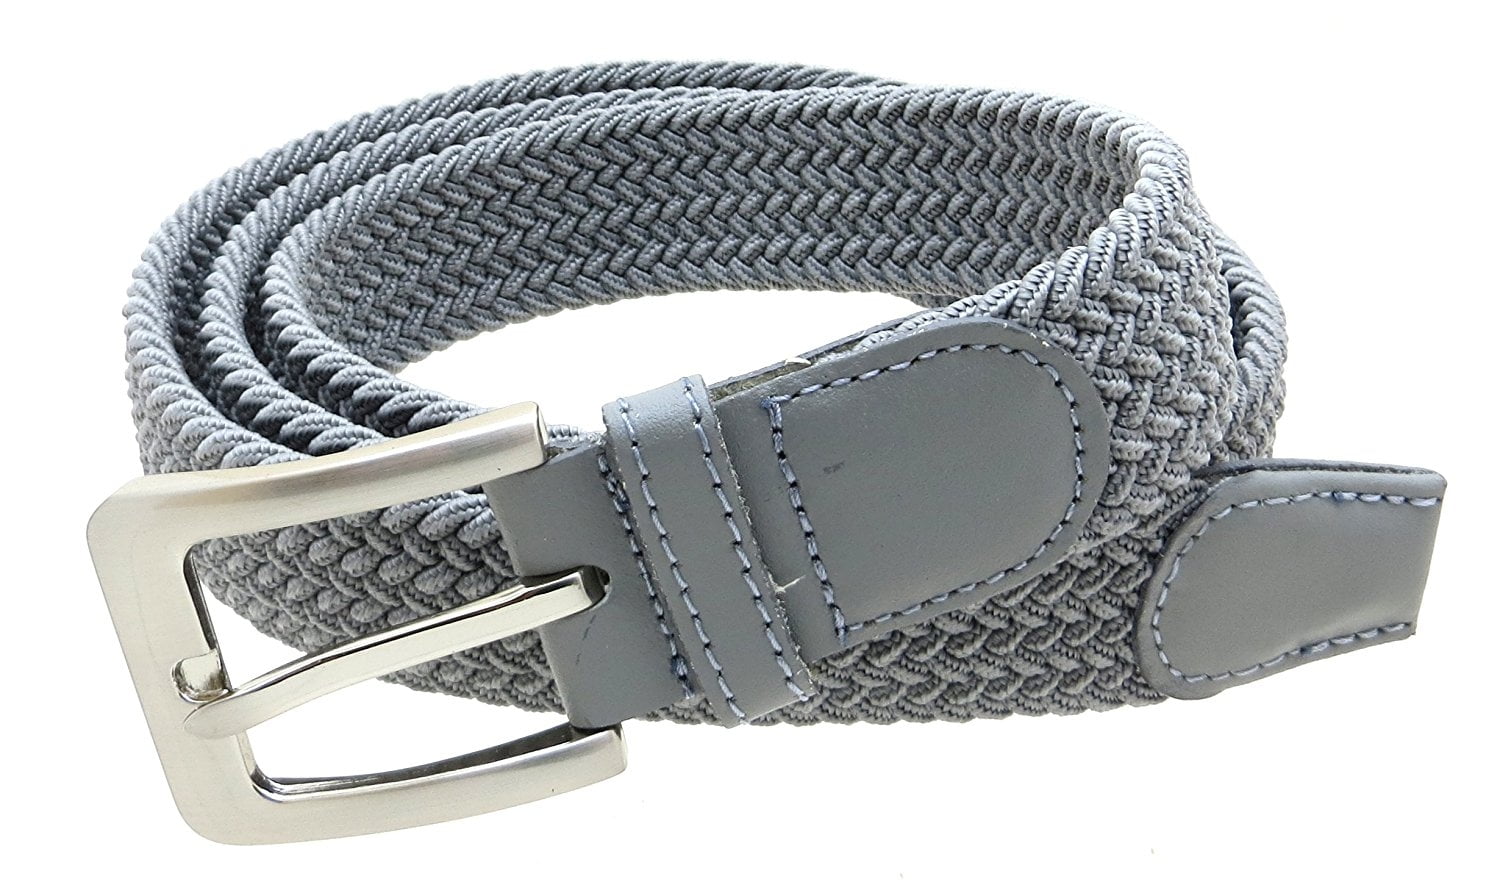 Kids Braided Elastic Woven Stretch Belt Chrome Buckle and Leather Tip Perfect for Children School Uniform 